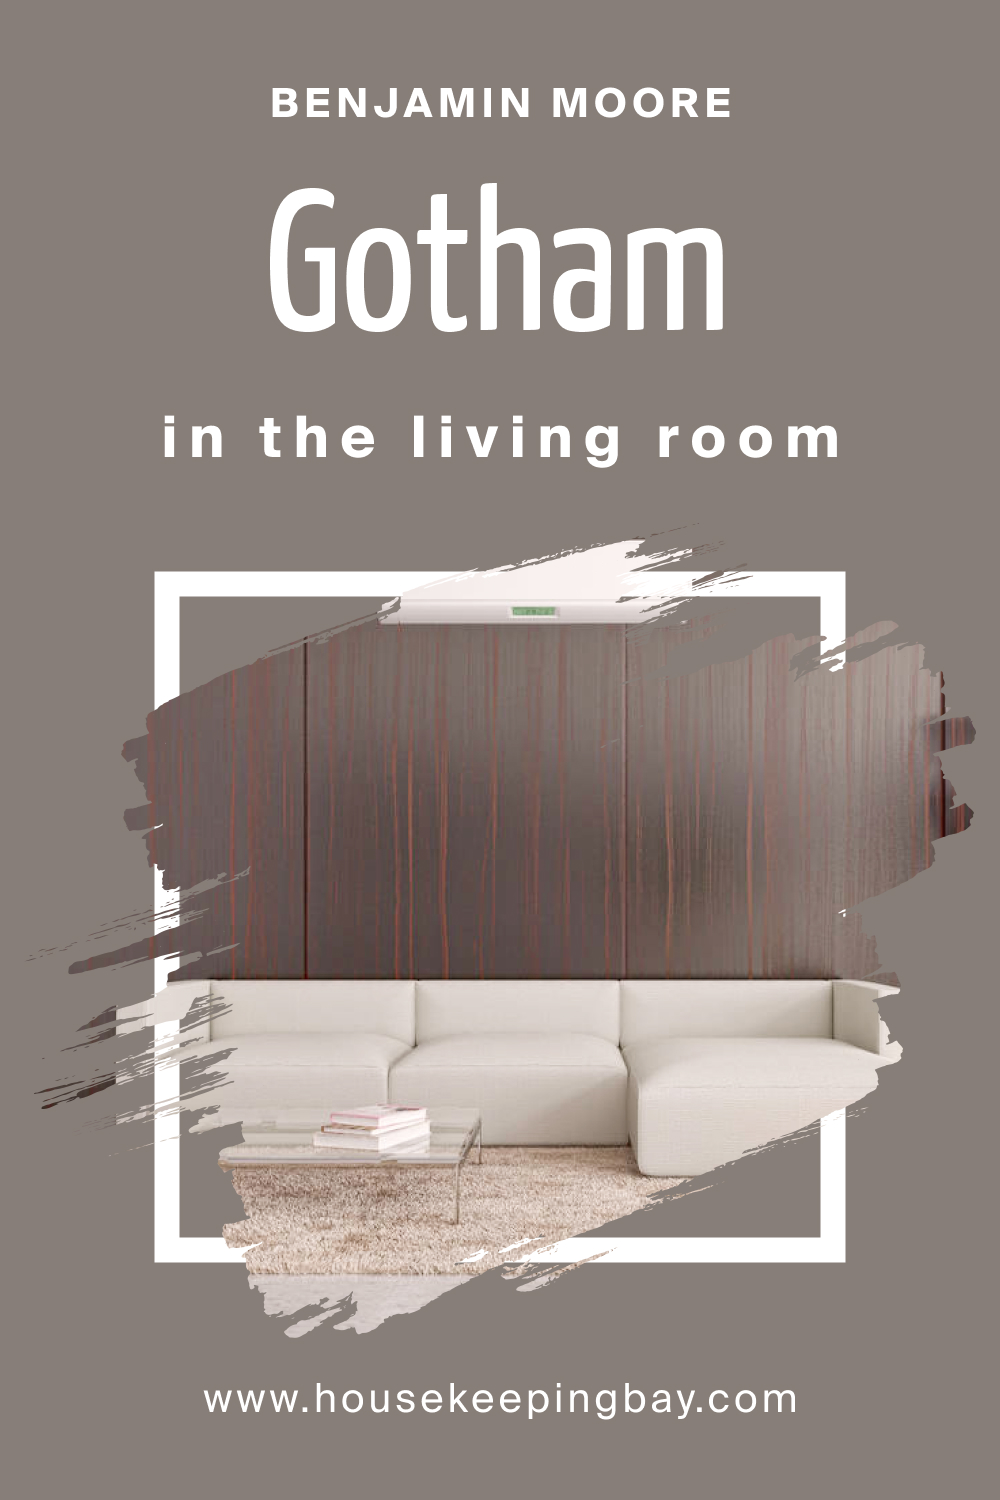 How to Use Gotham CSP-385 in the Living Room?